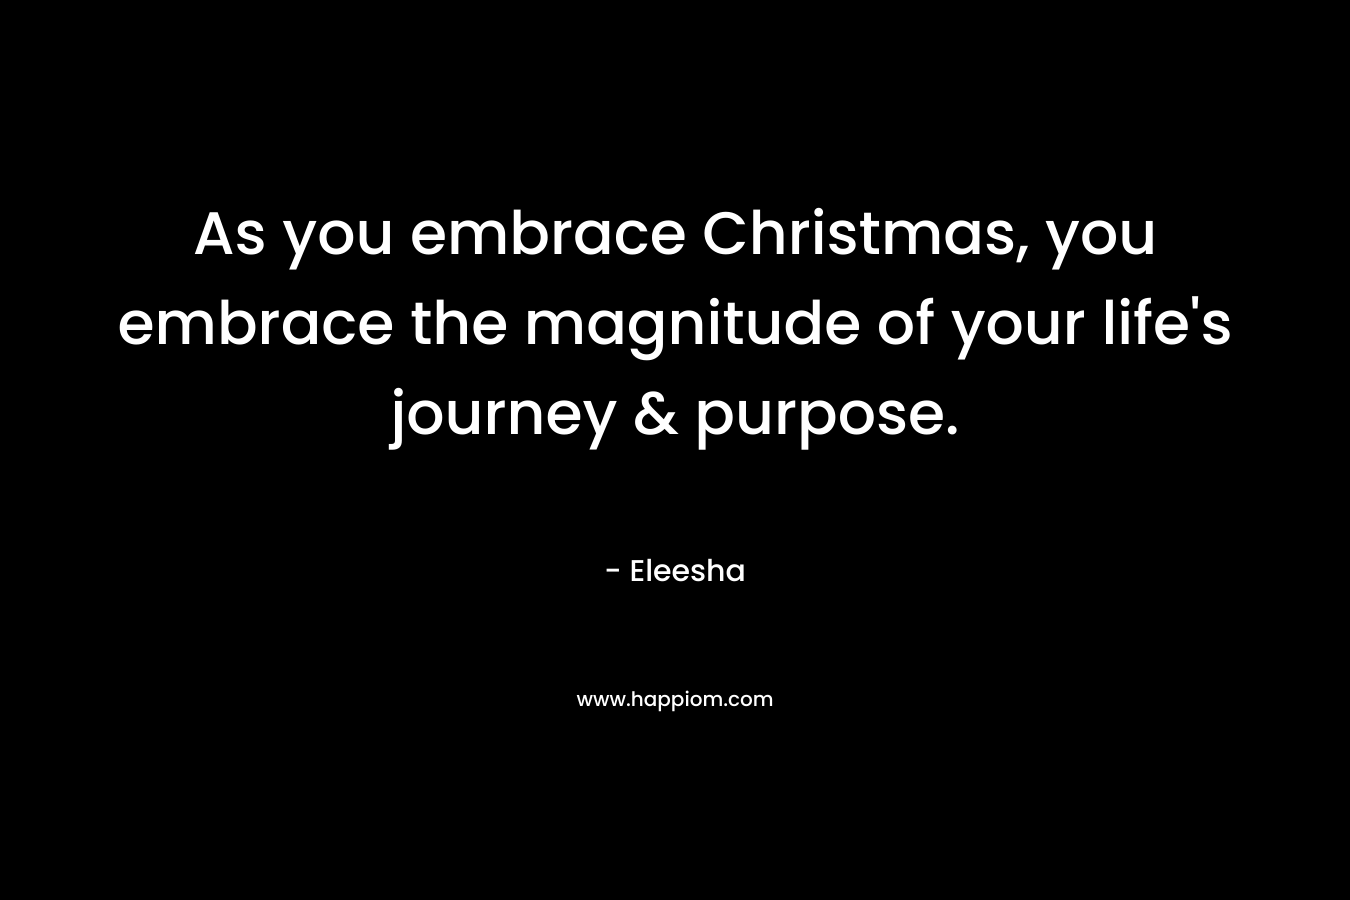 As you embrace Christmas, you embrace the magnitude of your life's journey & purpose.